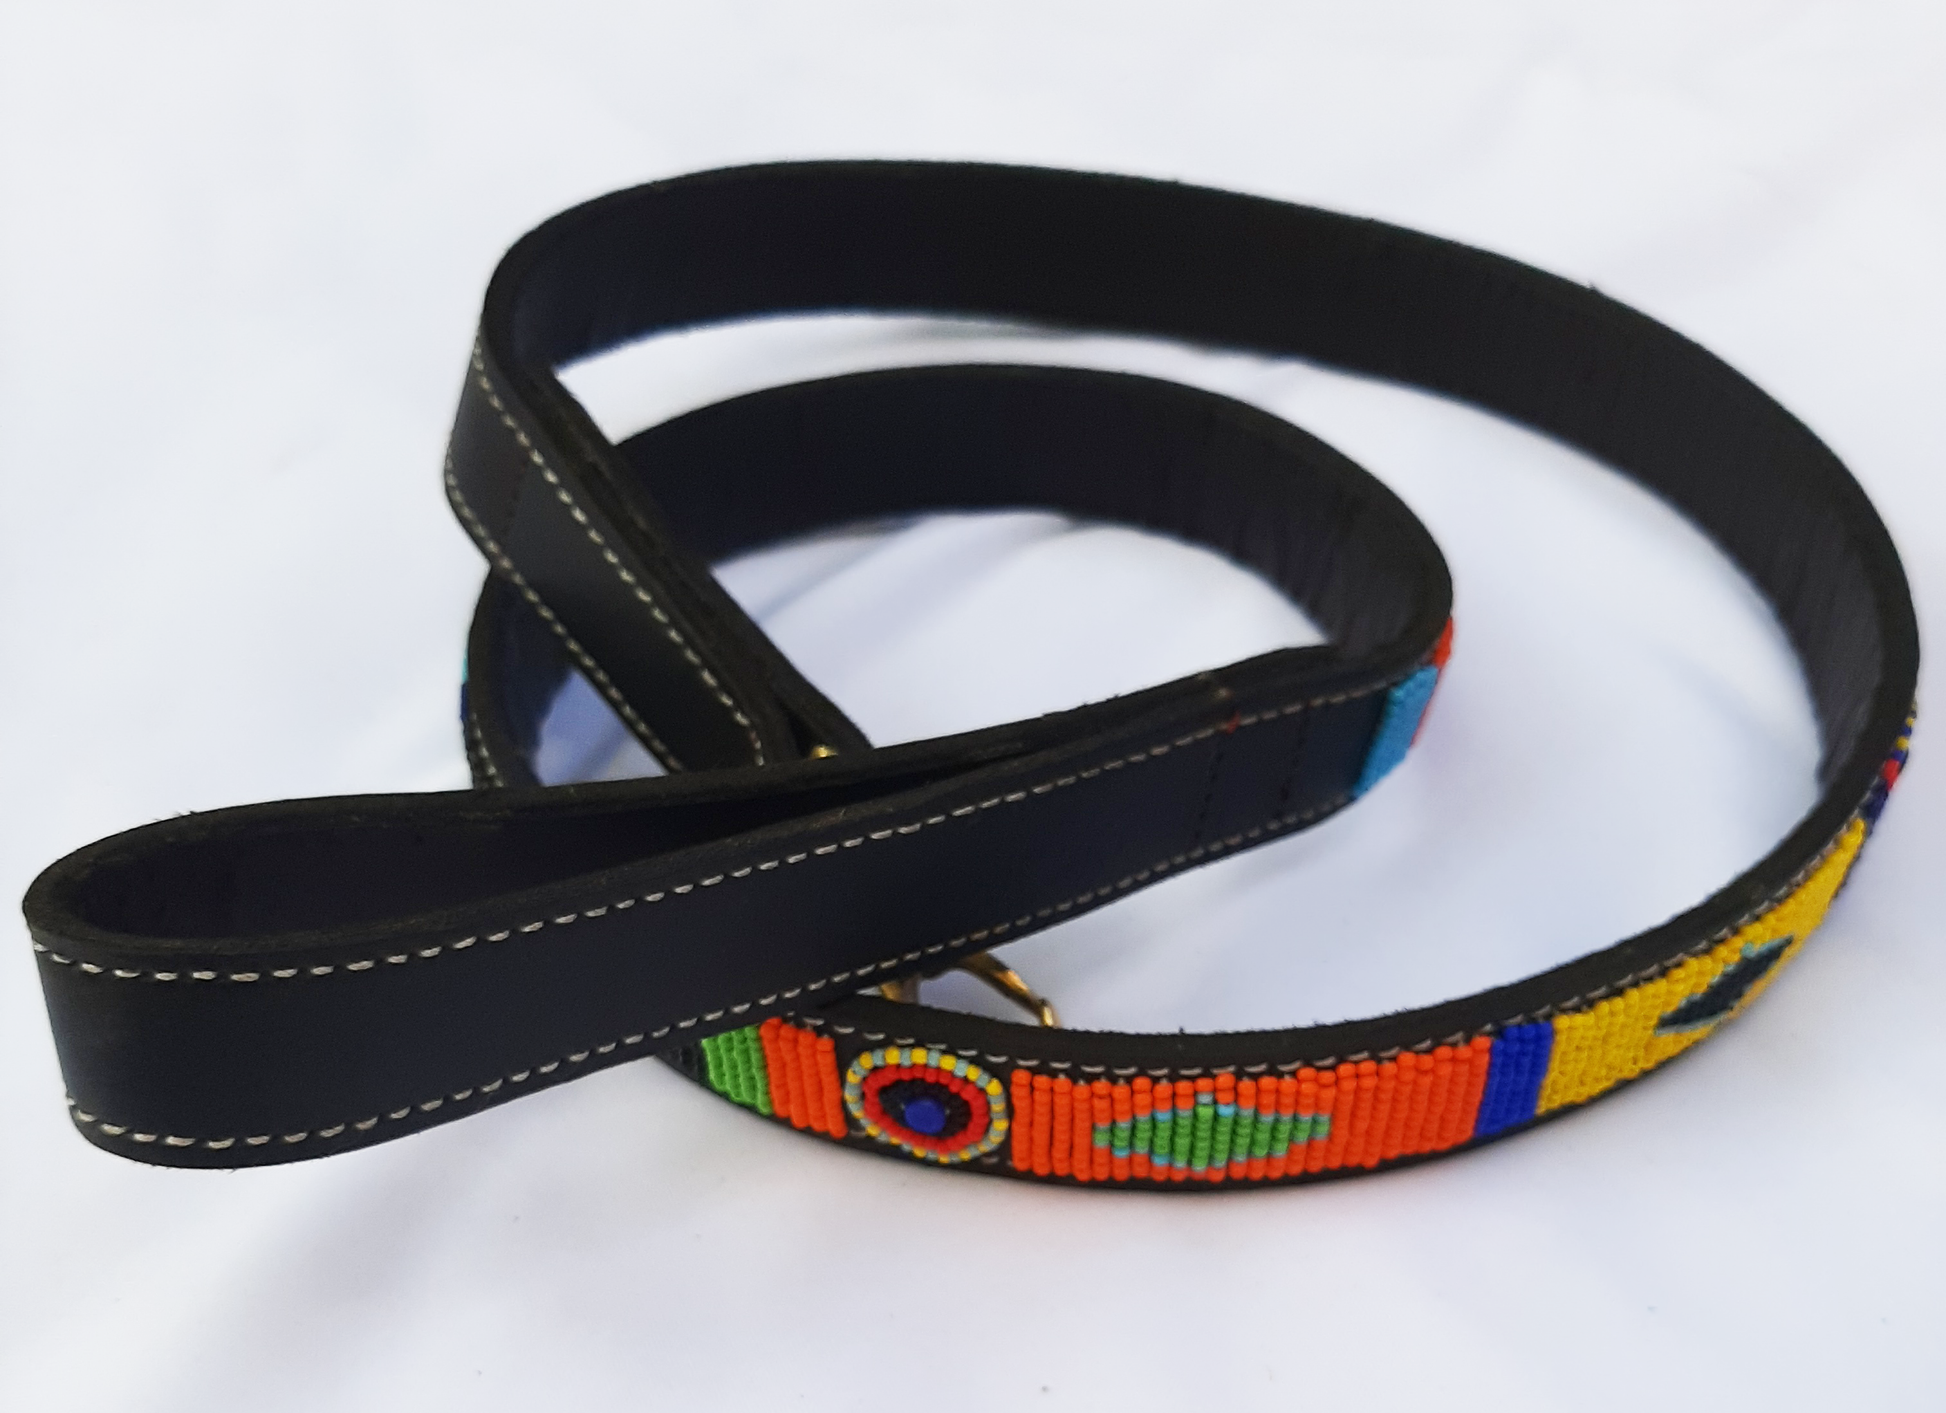 Dog leash with lining - Authentic African handicrafts | Clothing, bags, painting, toys & more - CULTURE HUB by Muthoni Unchained